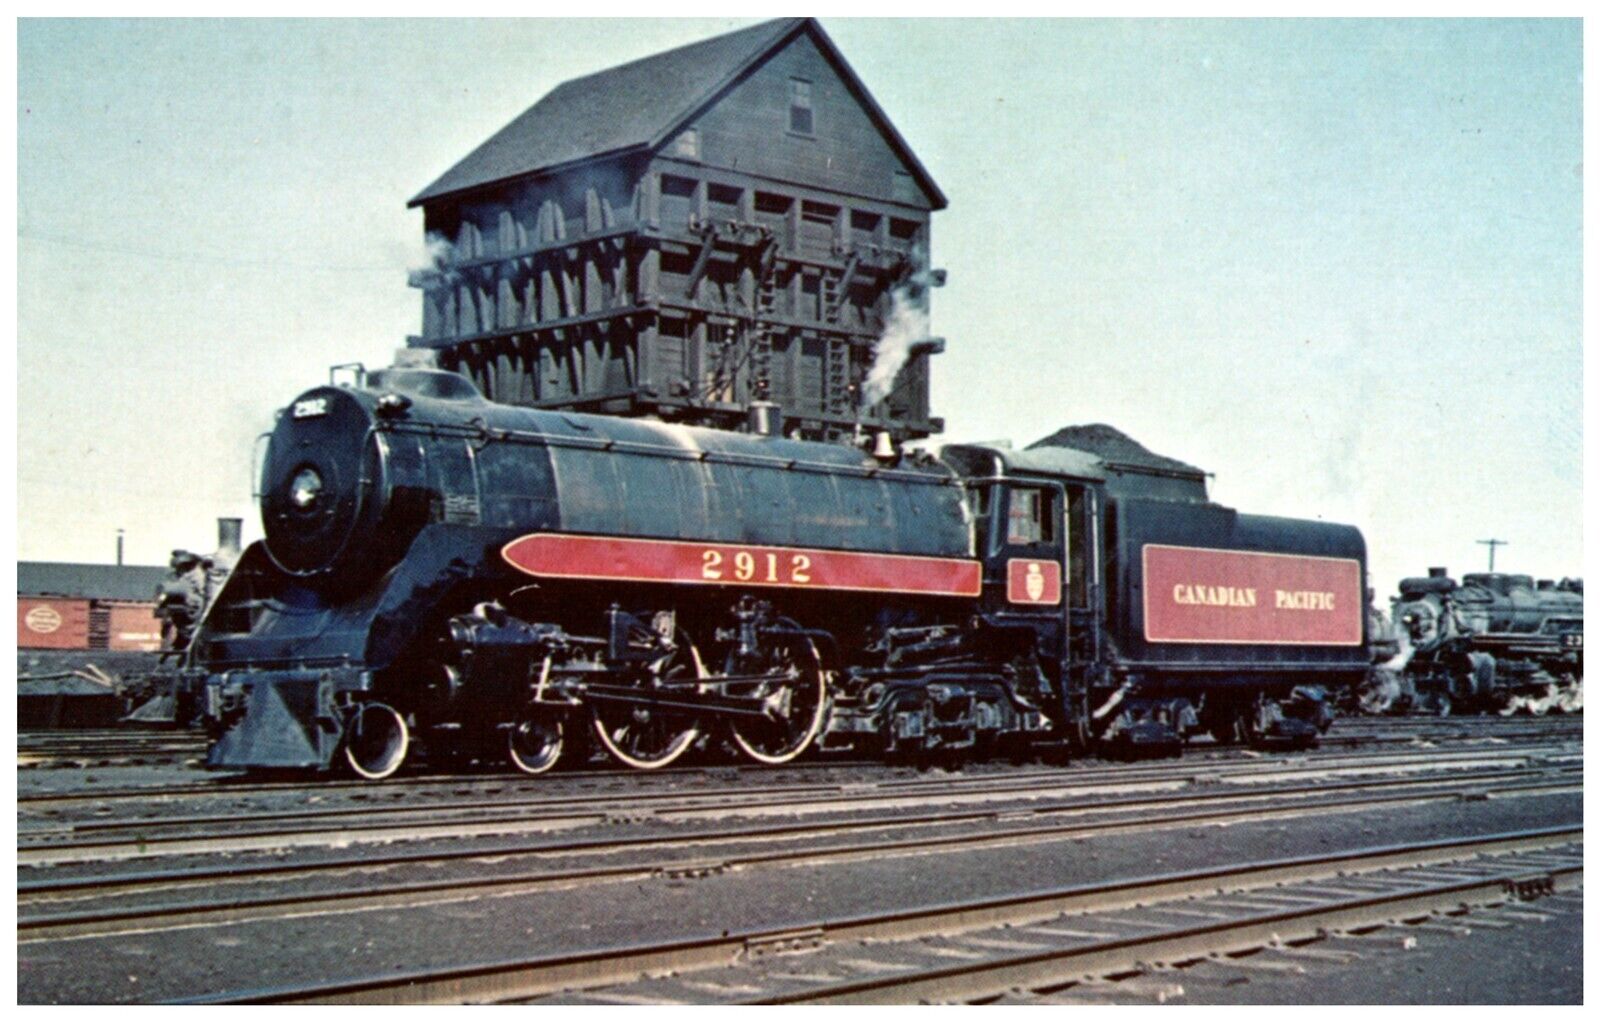 Canadian Pacific Train 2912 with Maintenance building in back Winnipeg 1953